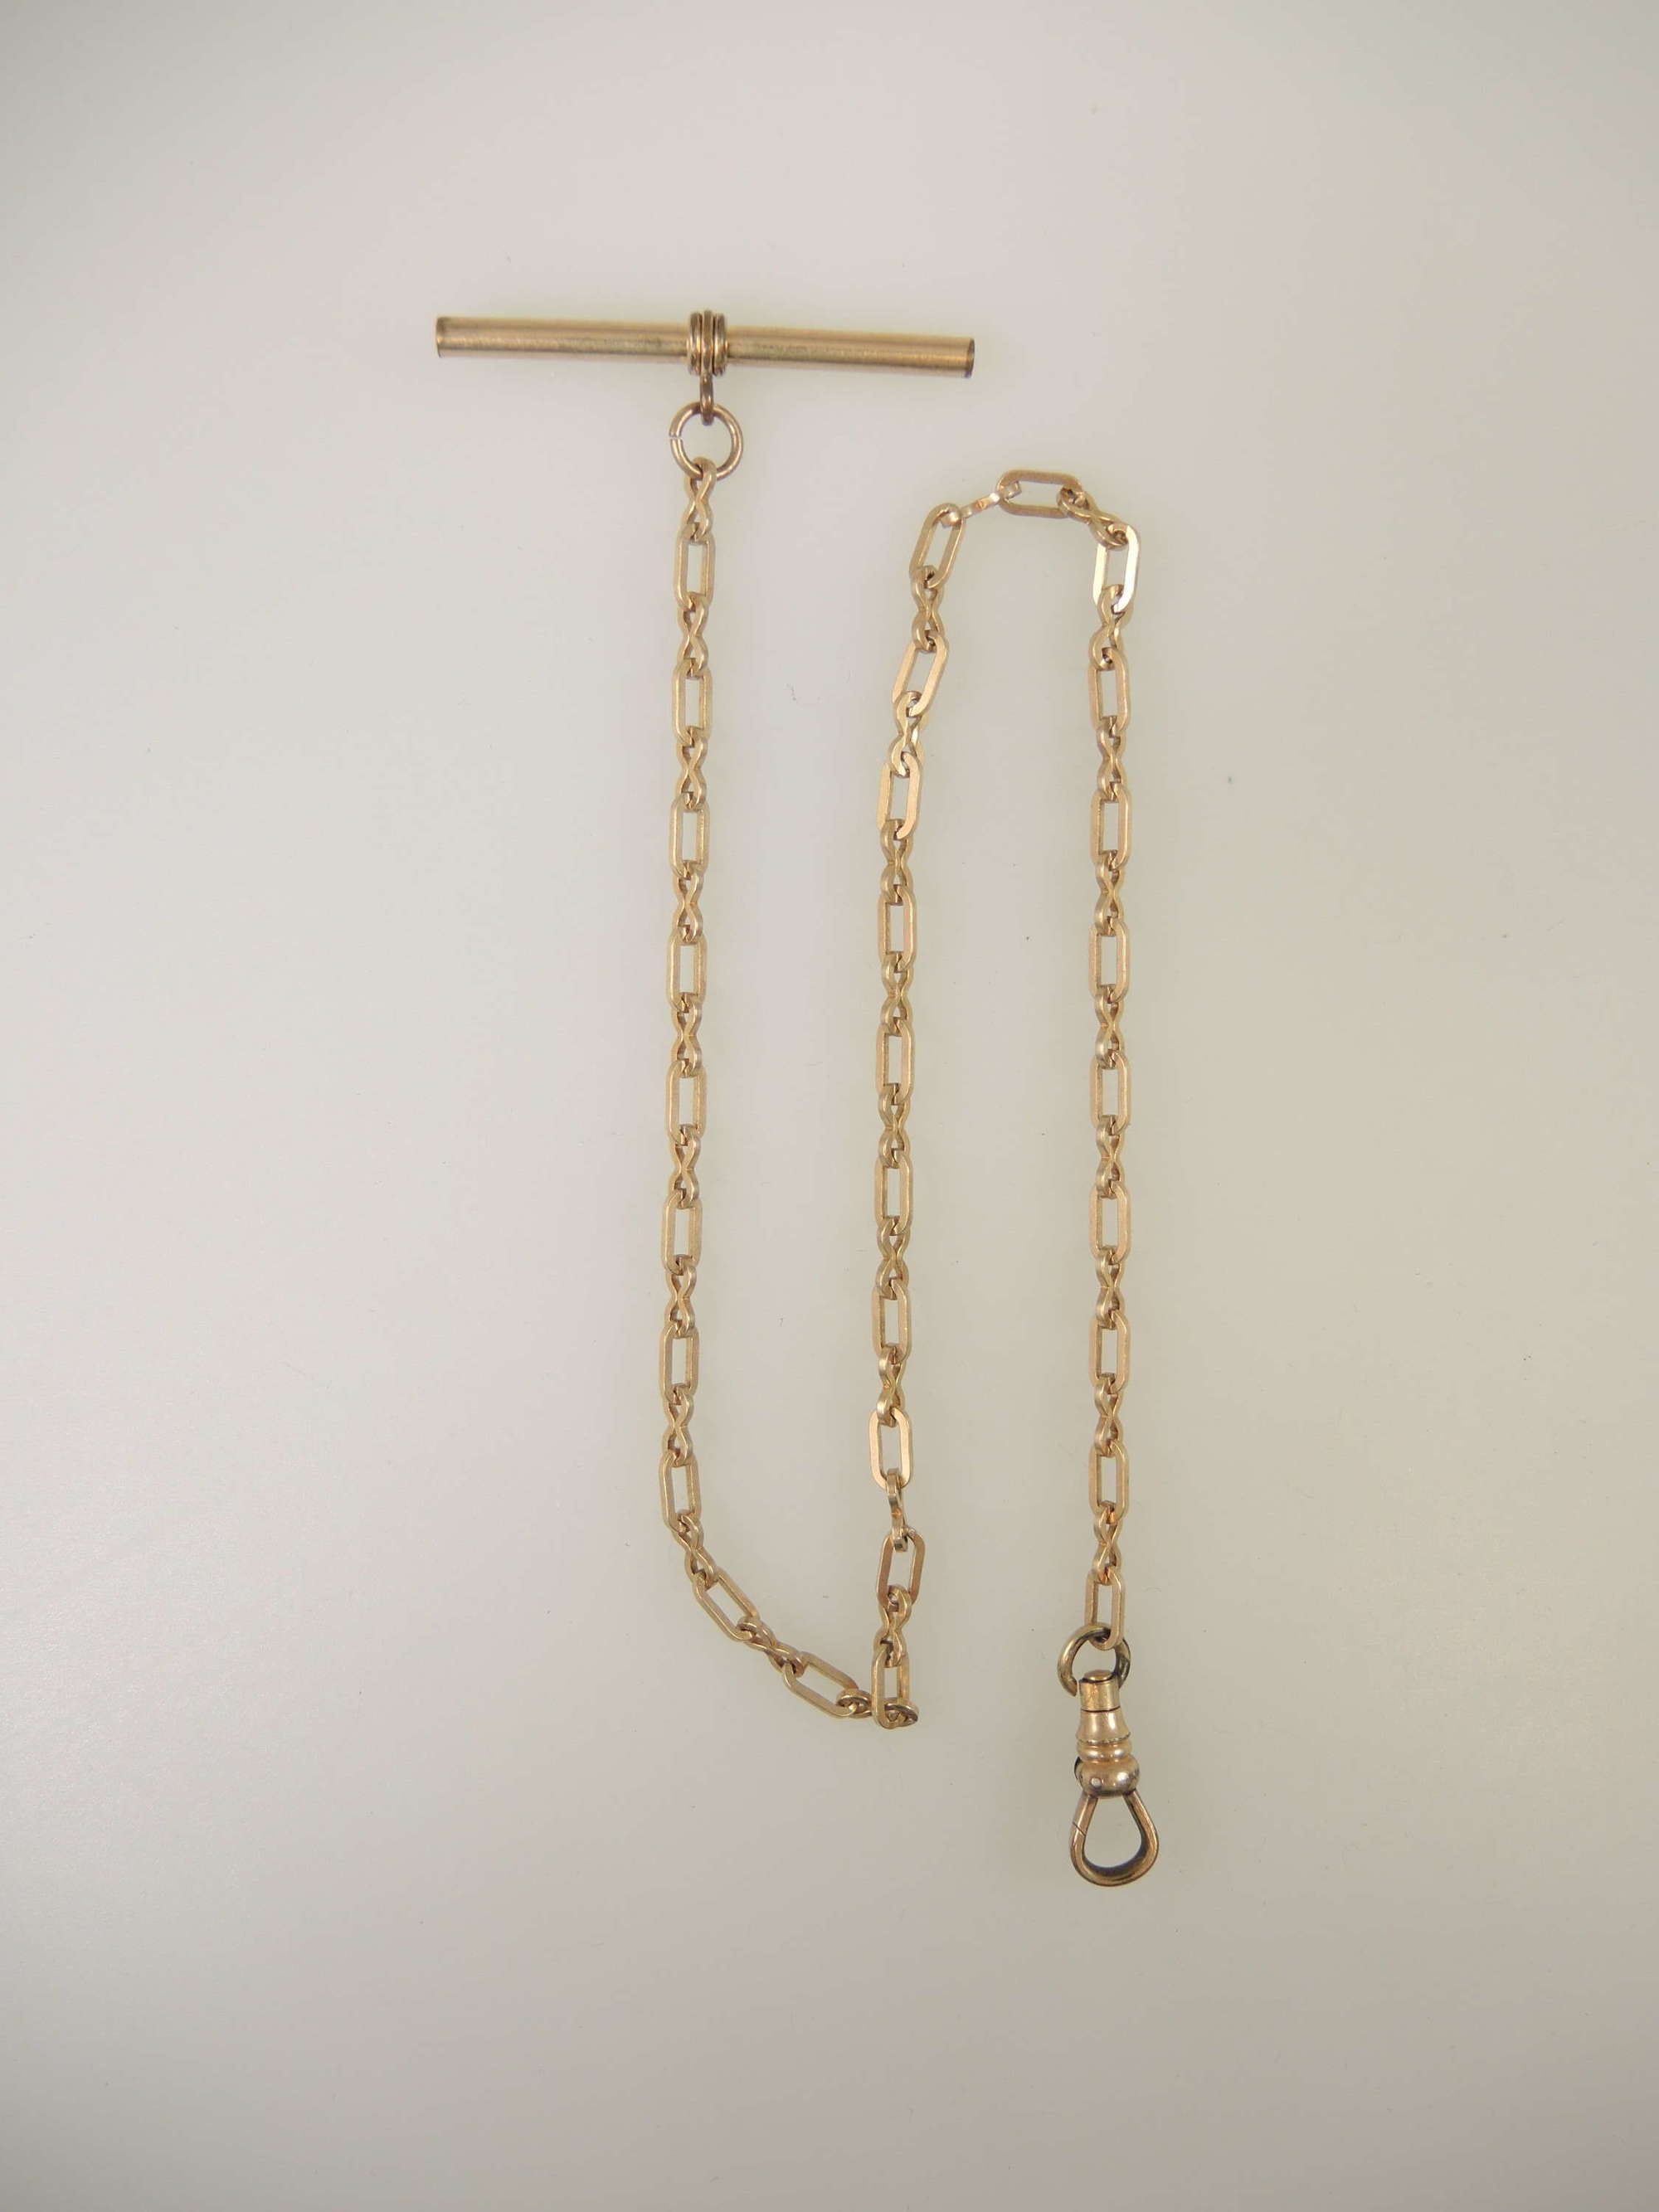 Good example of a Victorian gold plated pocket watch chain c1890